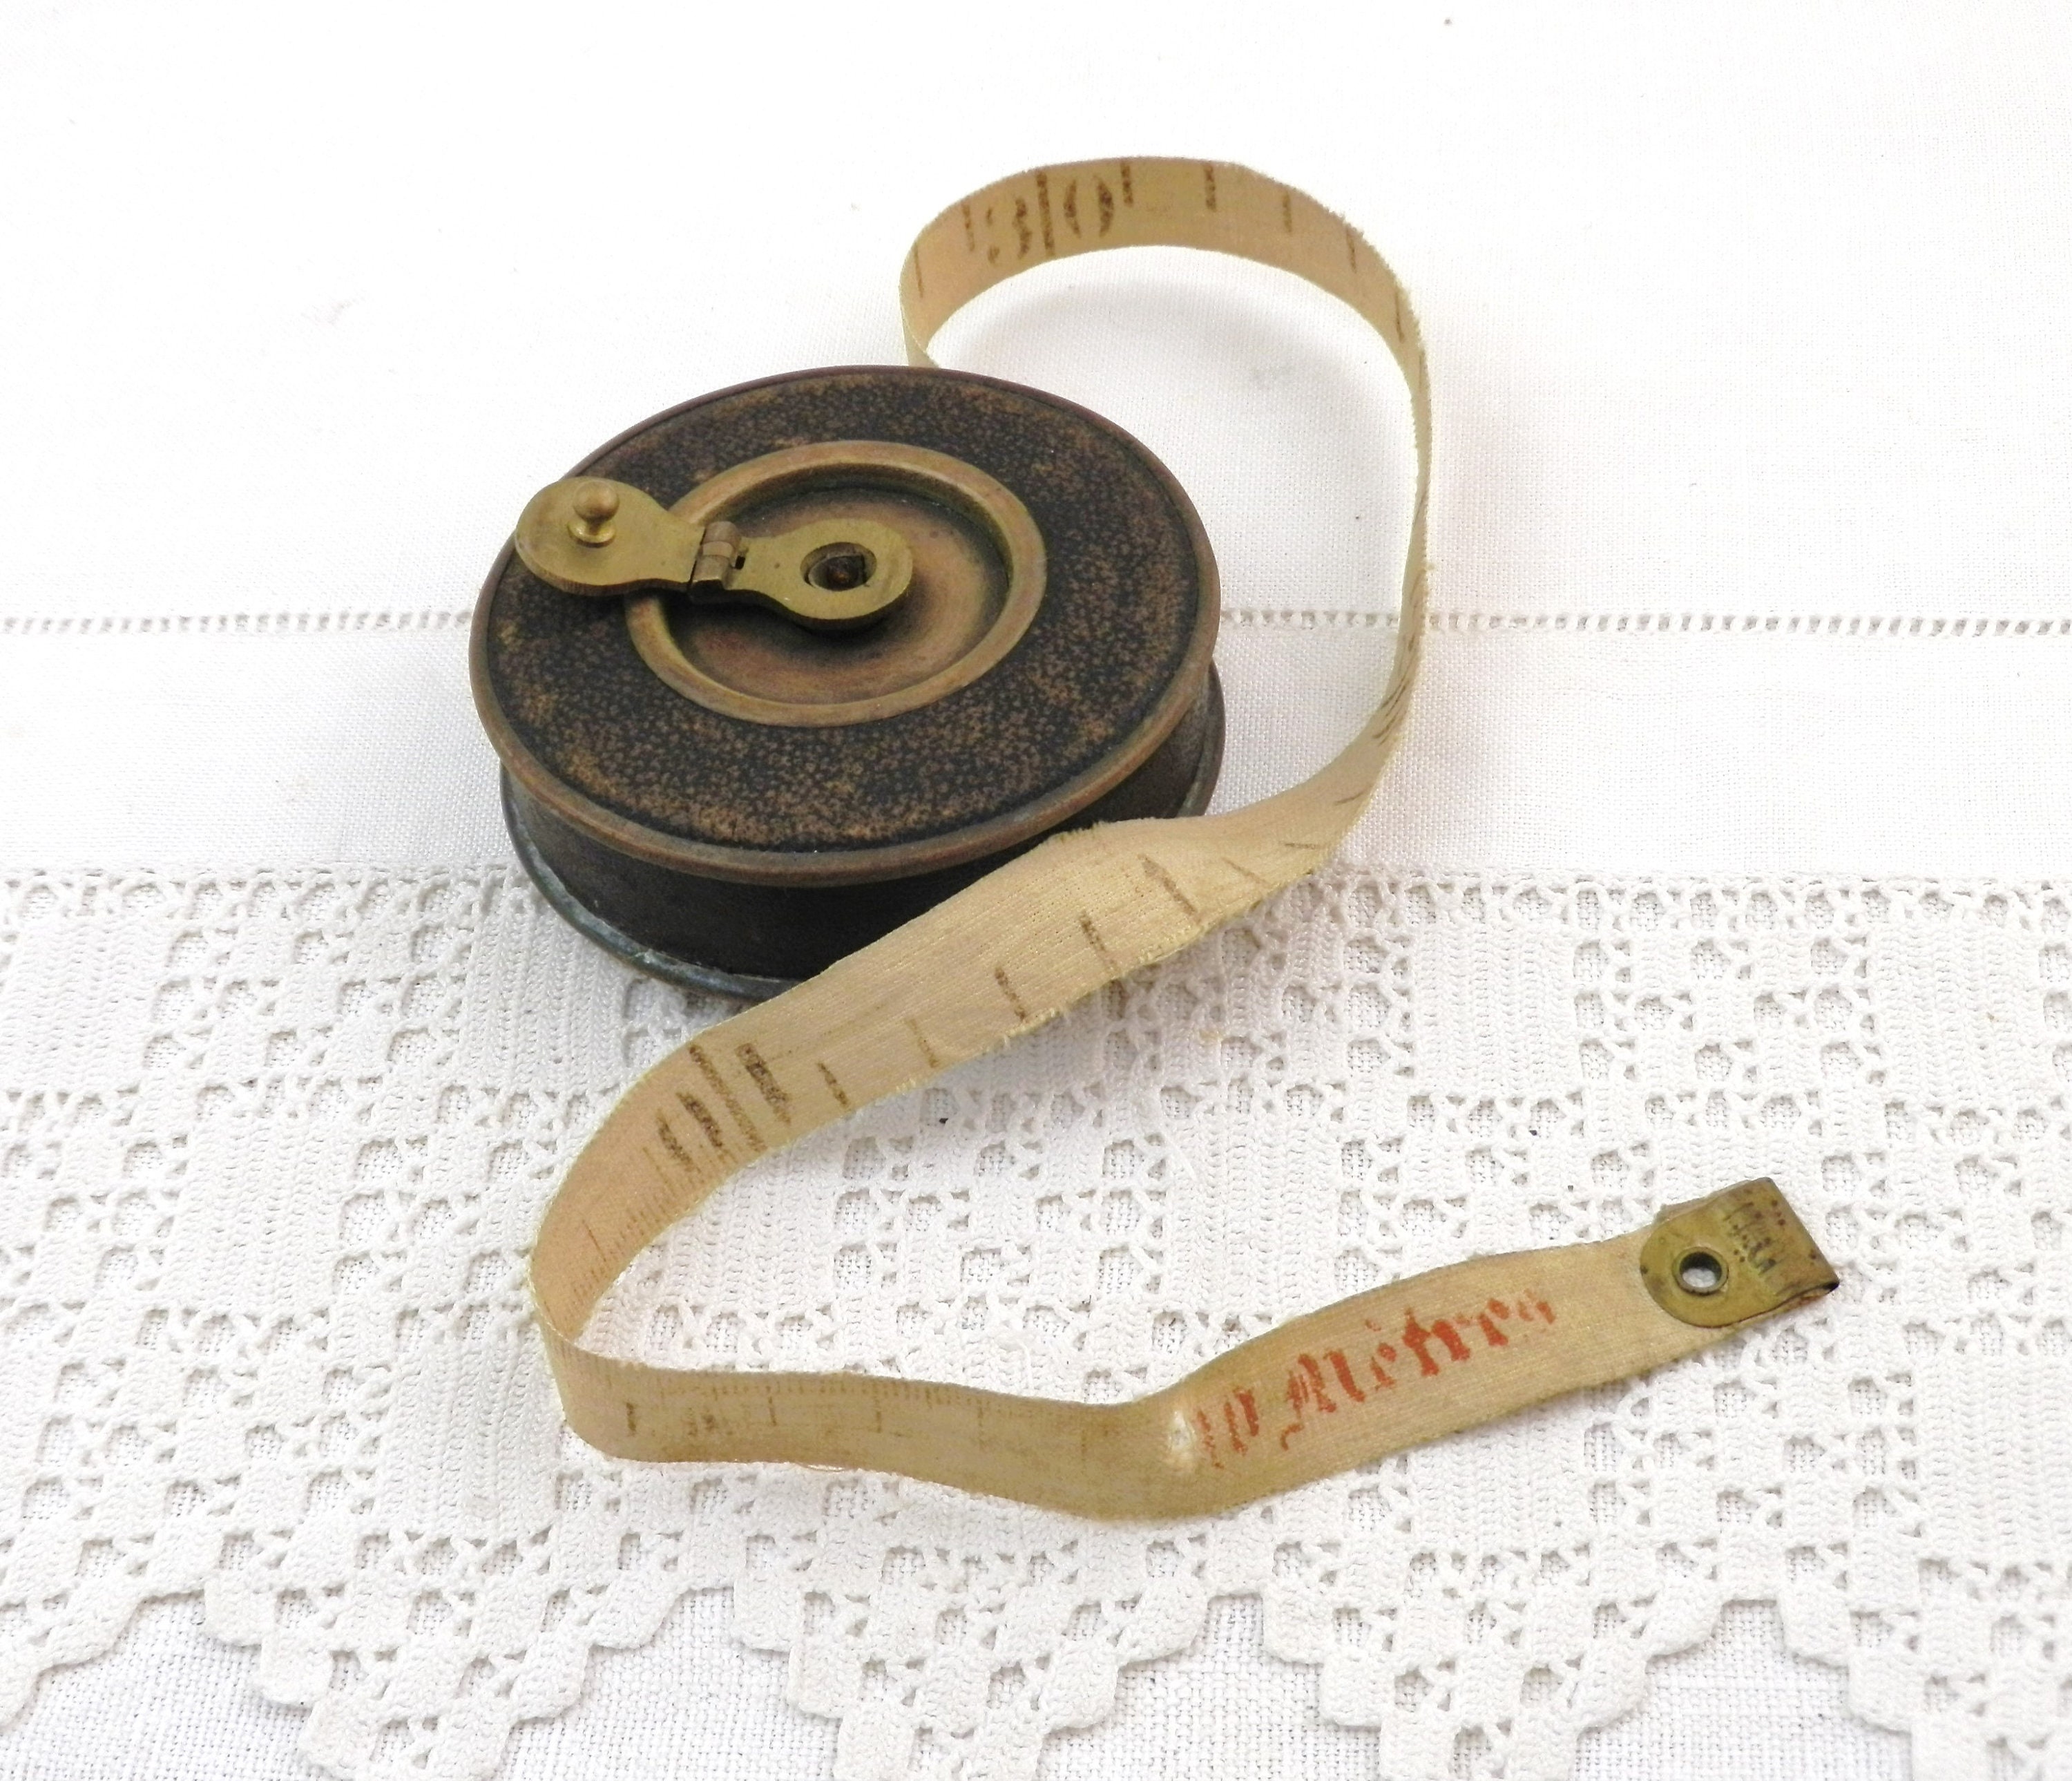 Antique Vintage Ruler Measuring Tape Patch Fabric Made in Korea by